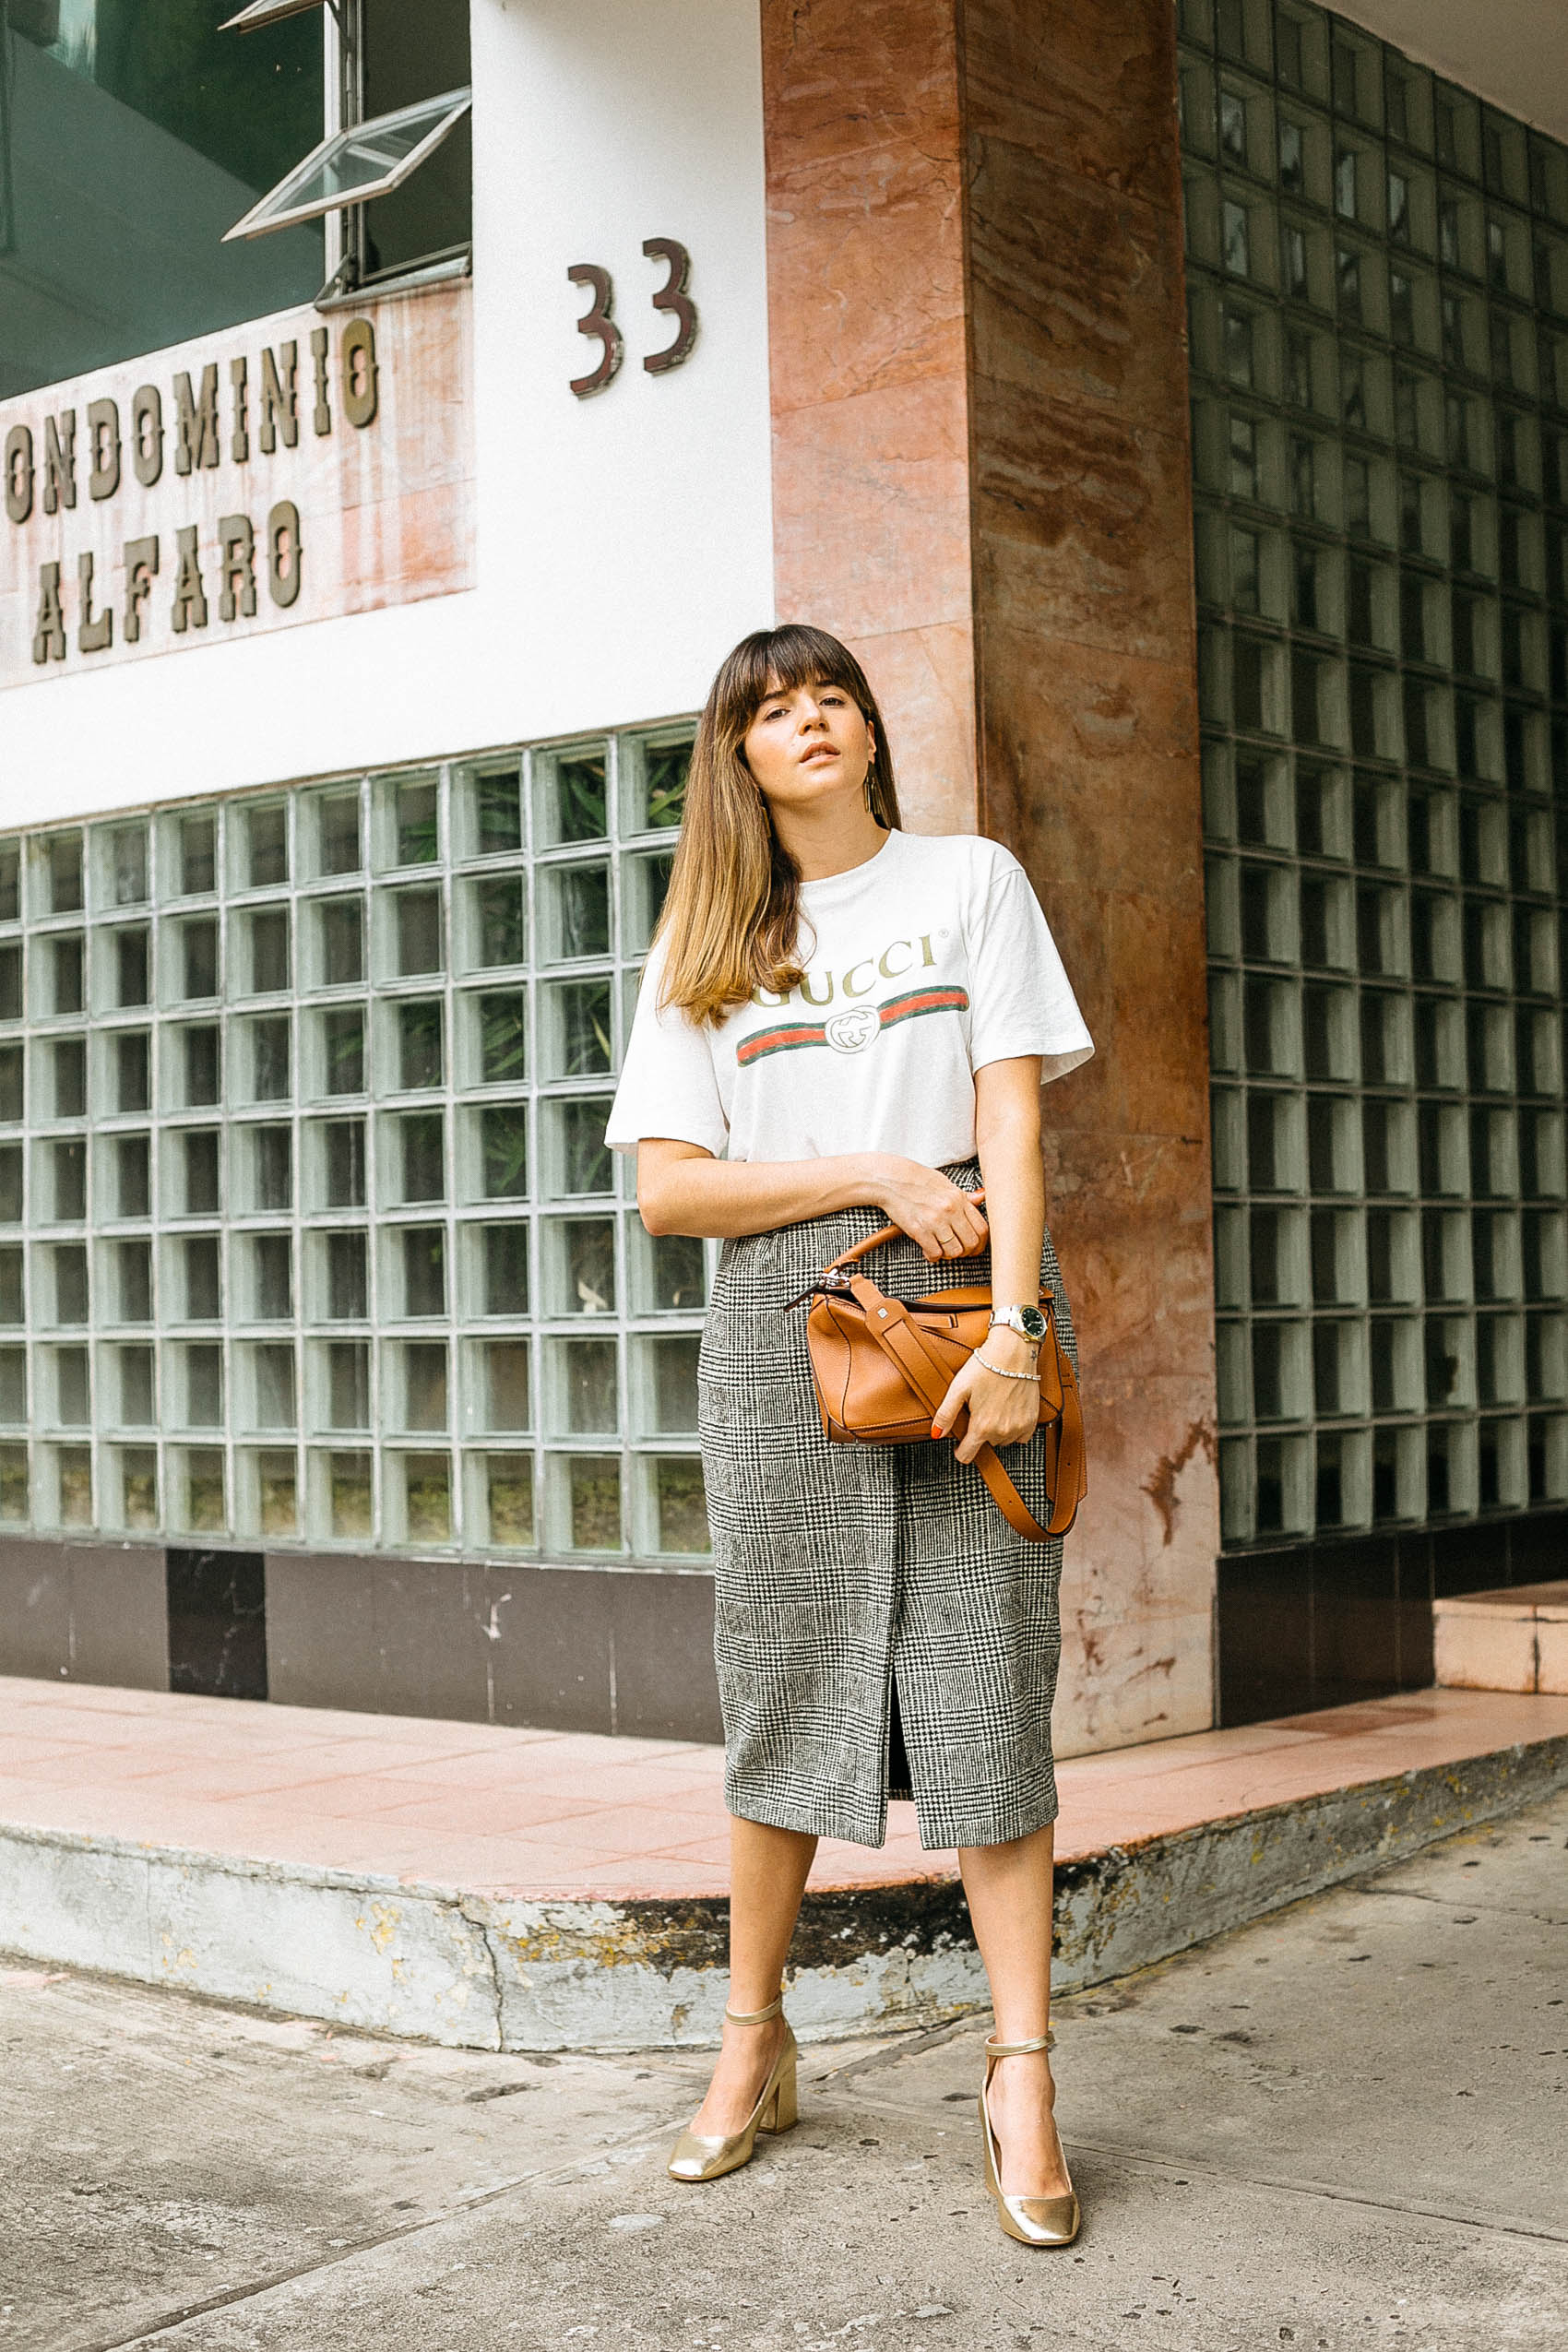 Maristella wears a Gucci cotton logo t-shirt with a vintage wool pencil skirt from MaxMara